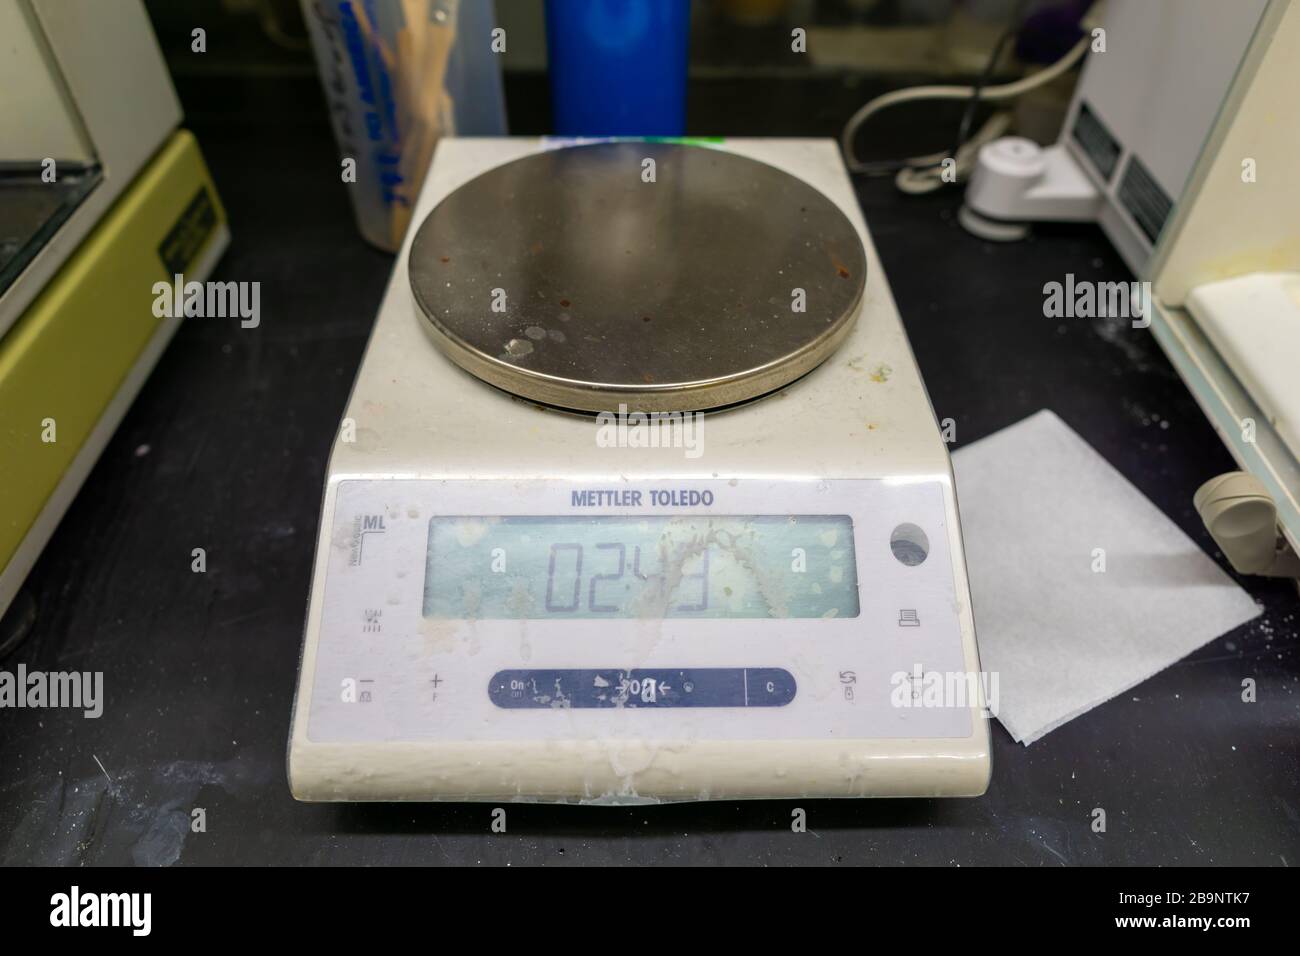 Analytical Balance Digital Lab Scale With Chemical Flask On The Desk 3d  Rendering Stock Photo - Download Image Now - iStock